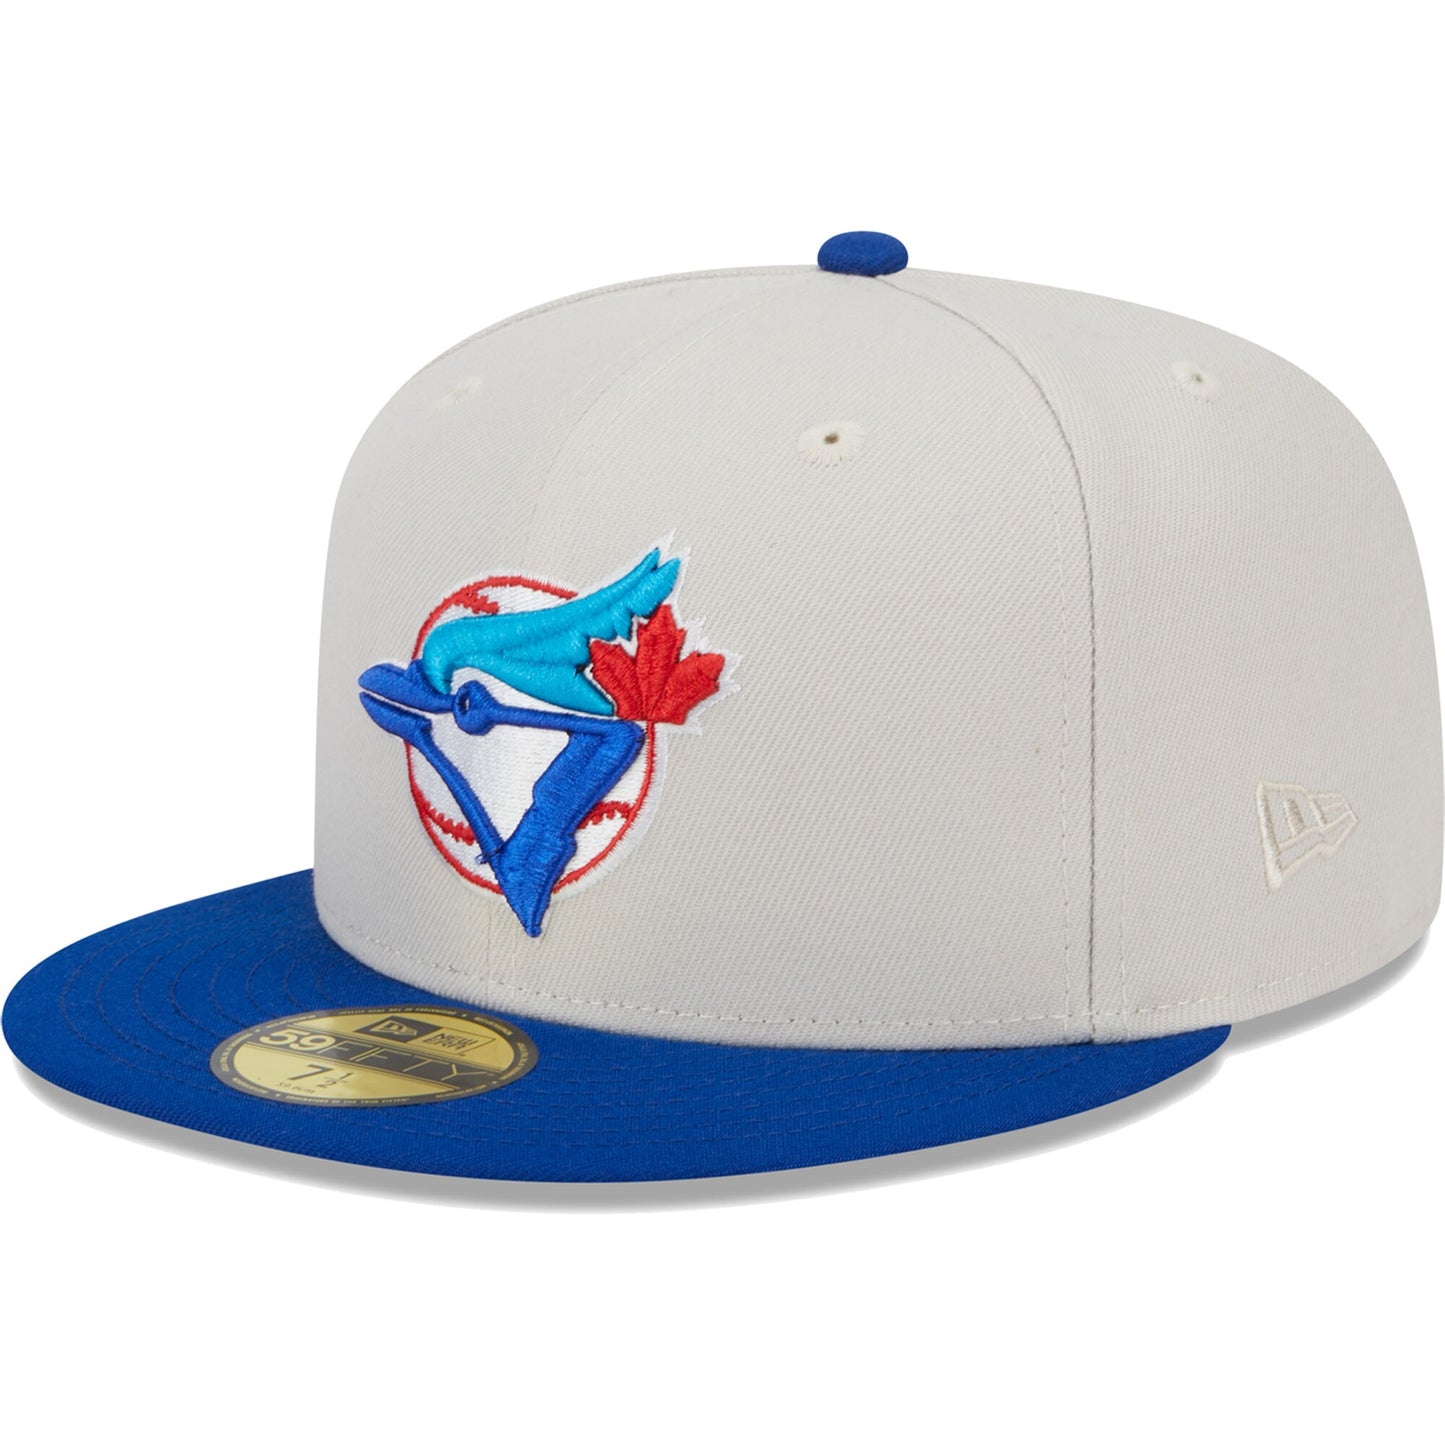 Toronto Blue Jays New Era World Class Back Patch 59FIFTY Fitted Hat - Gray/Royal